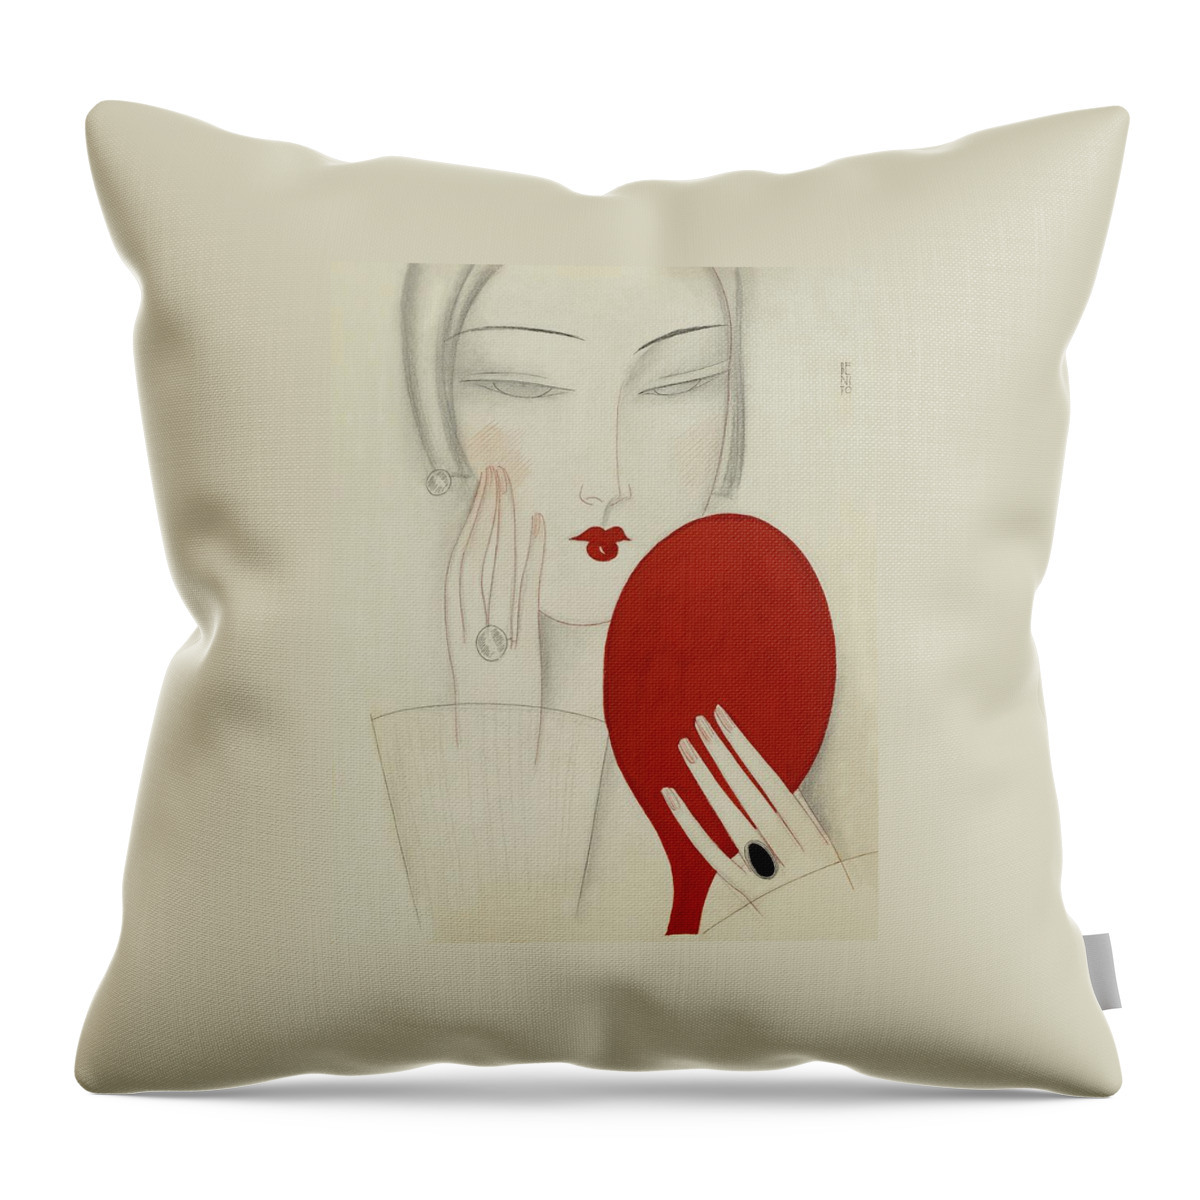 Illustration Of A Woman Peering Into A Red Throw Pillow